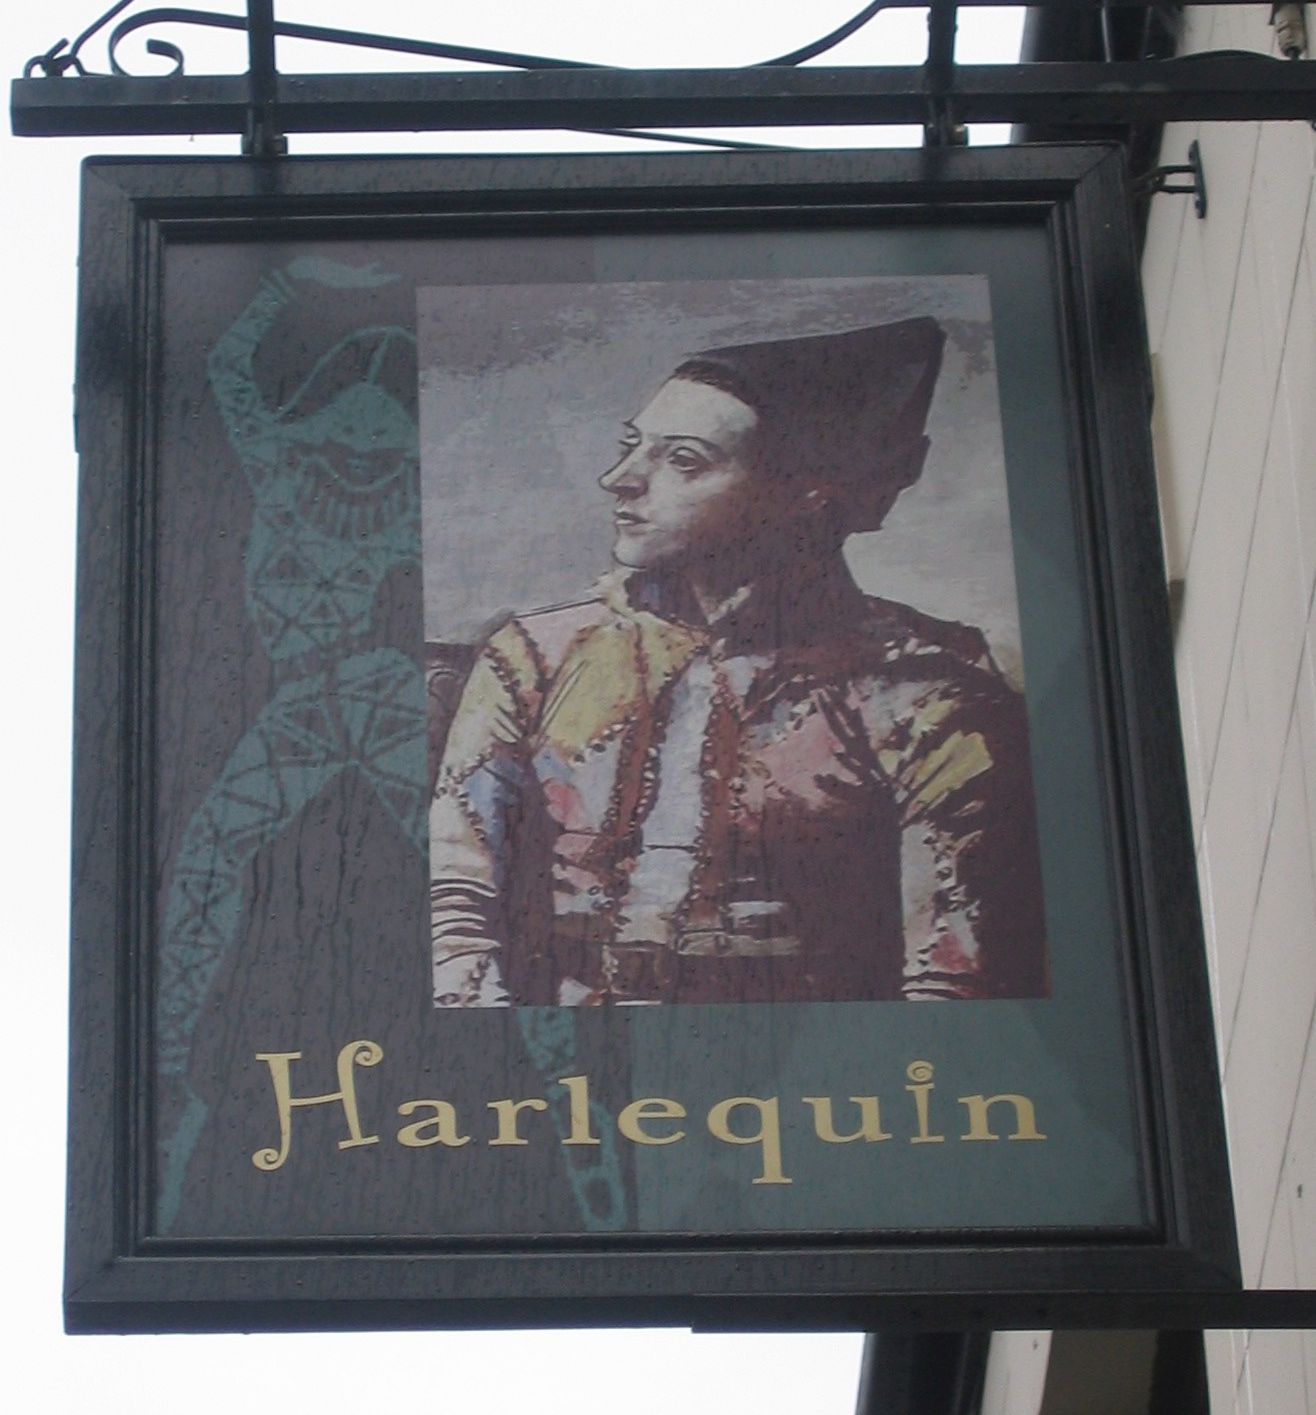 Pub Sign photo taken by me - The Harlequin Chadderton Manchester